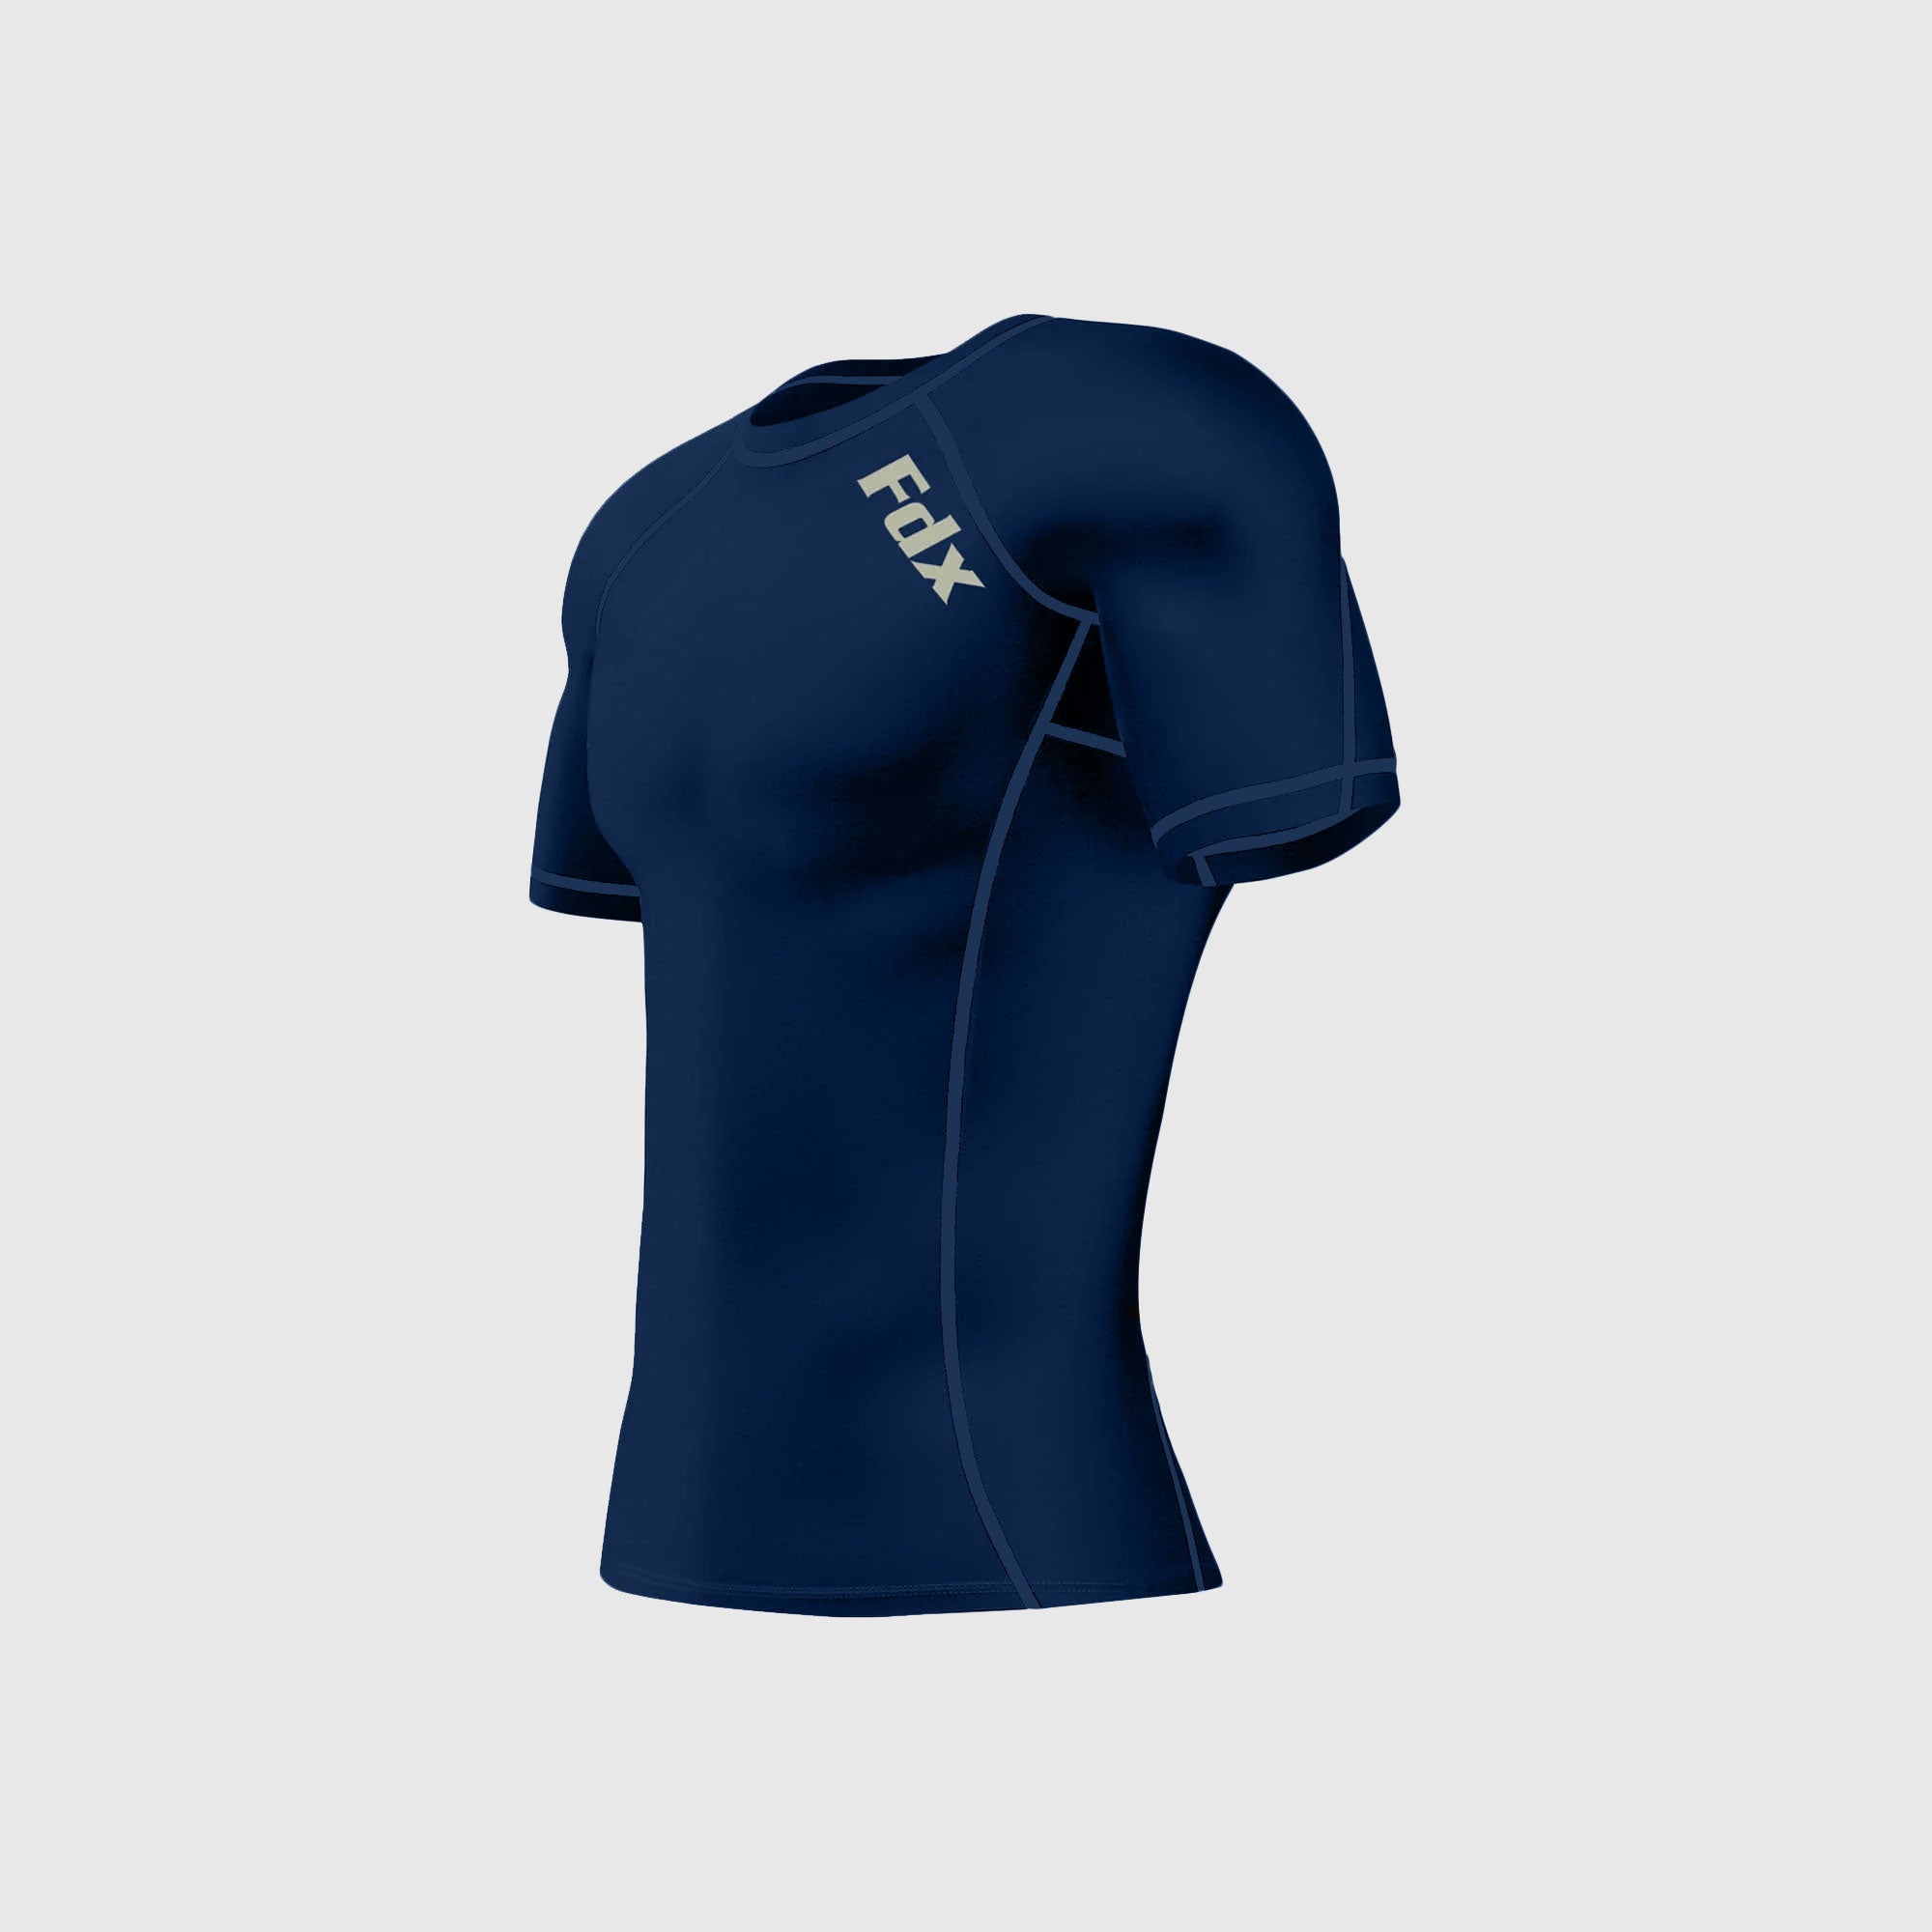 Fdx Men's navy Blue Short Sleeve Compression Top Running Gym Workout Wear Rash Guard Stretchable Breathable Base layer Shirt - Cosmic